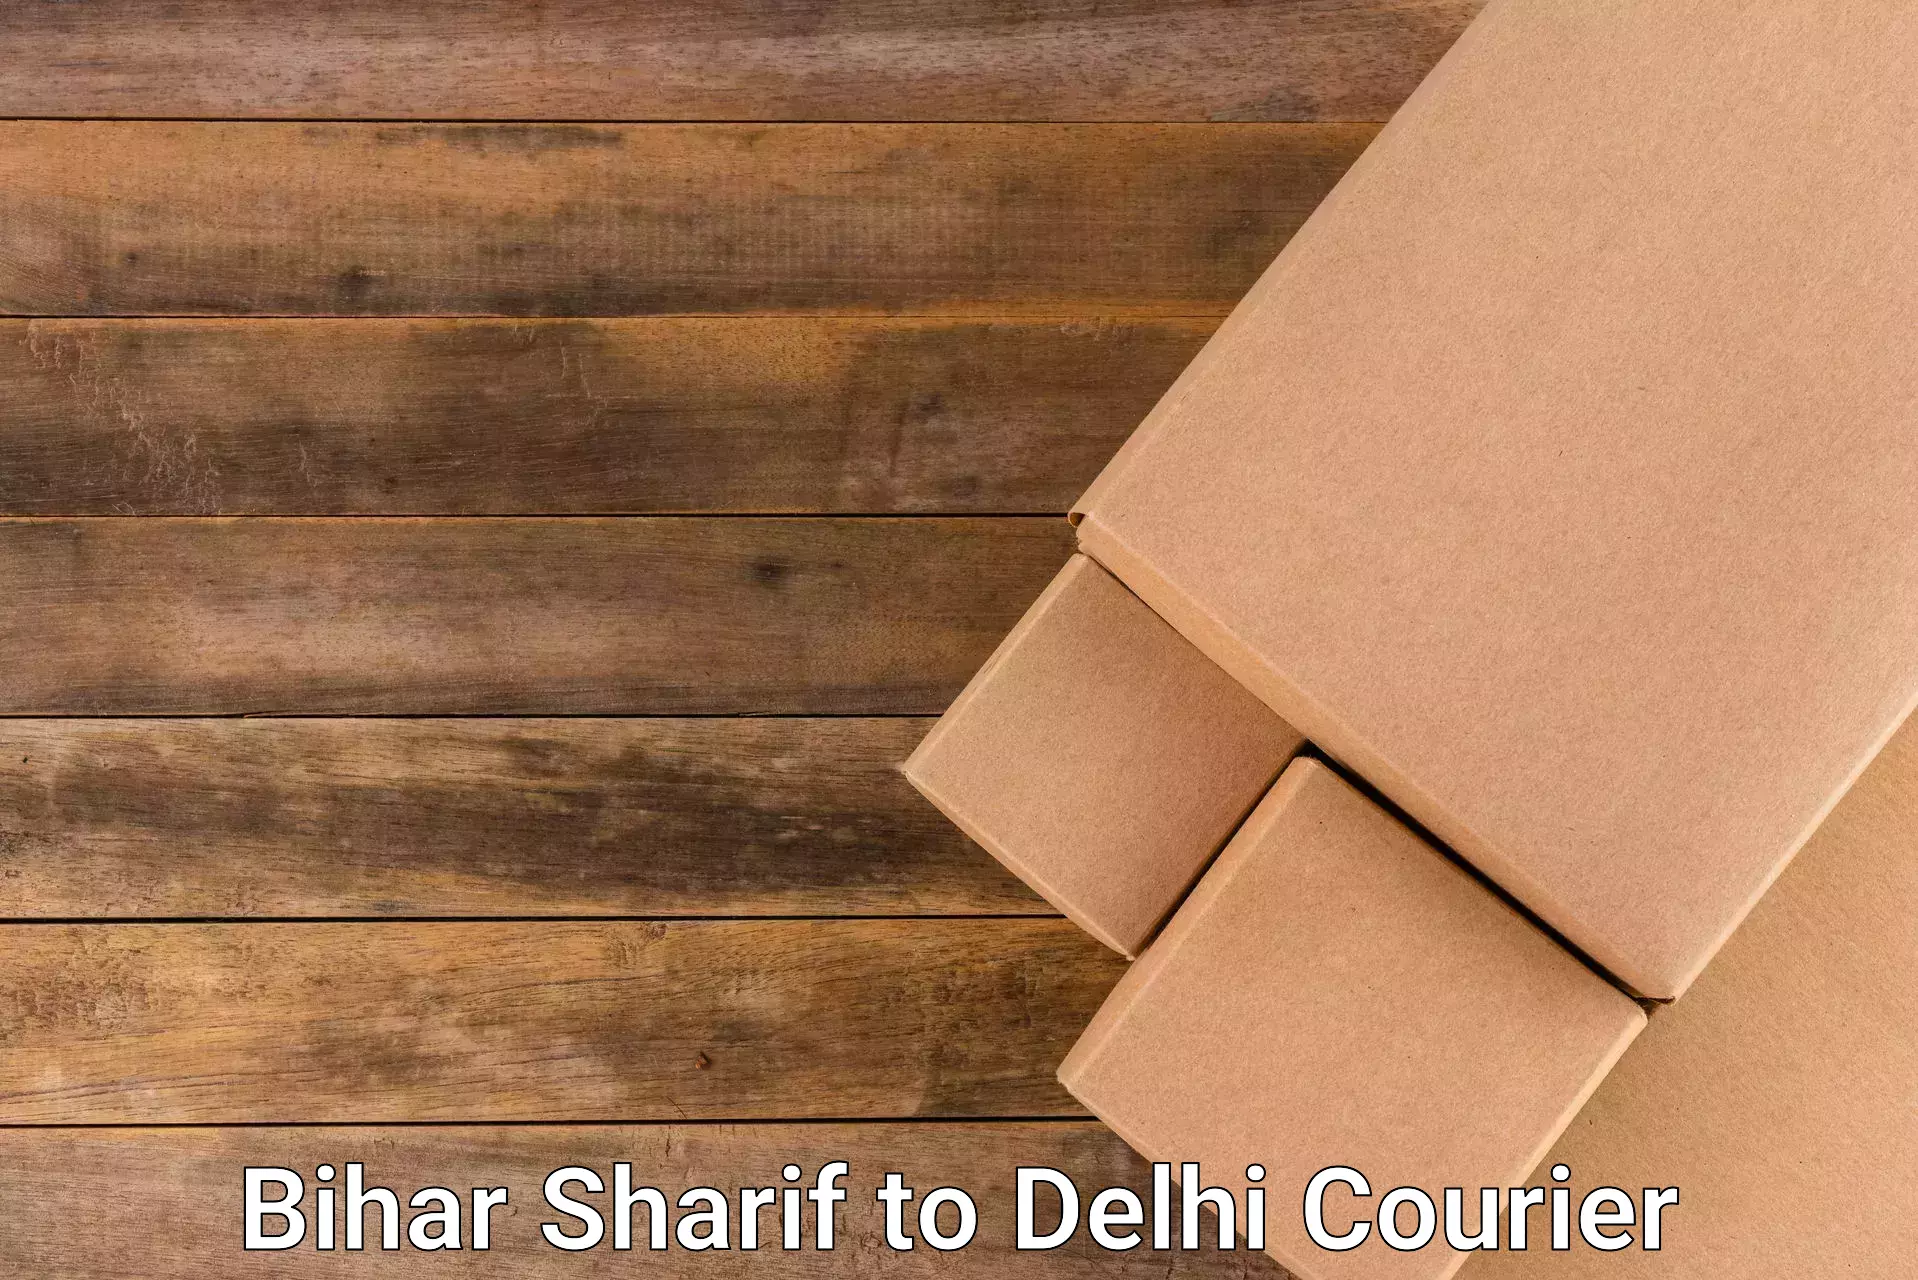 On-call courier service in Bihar Sharif to Delhi